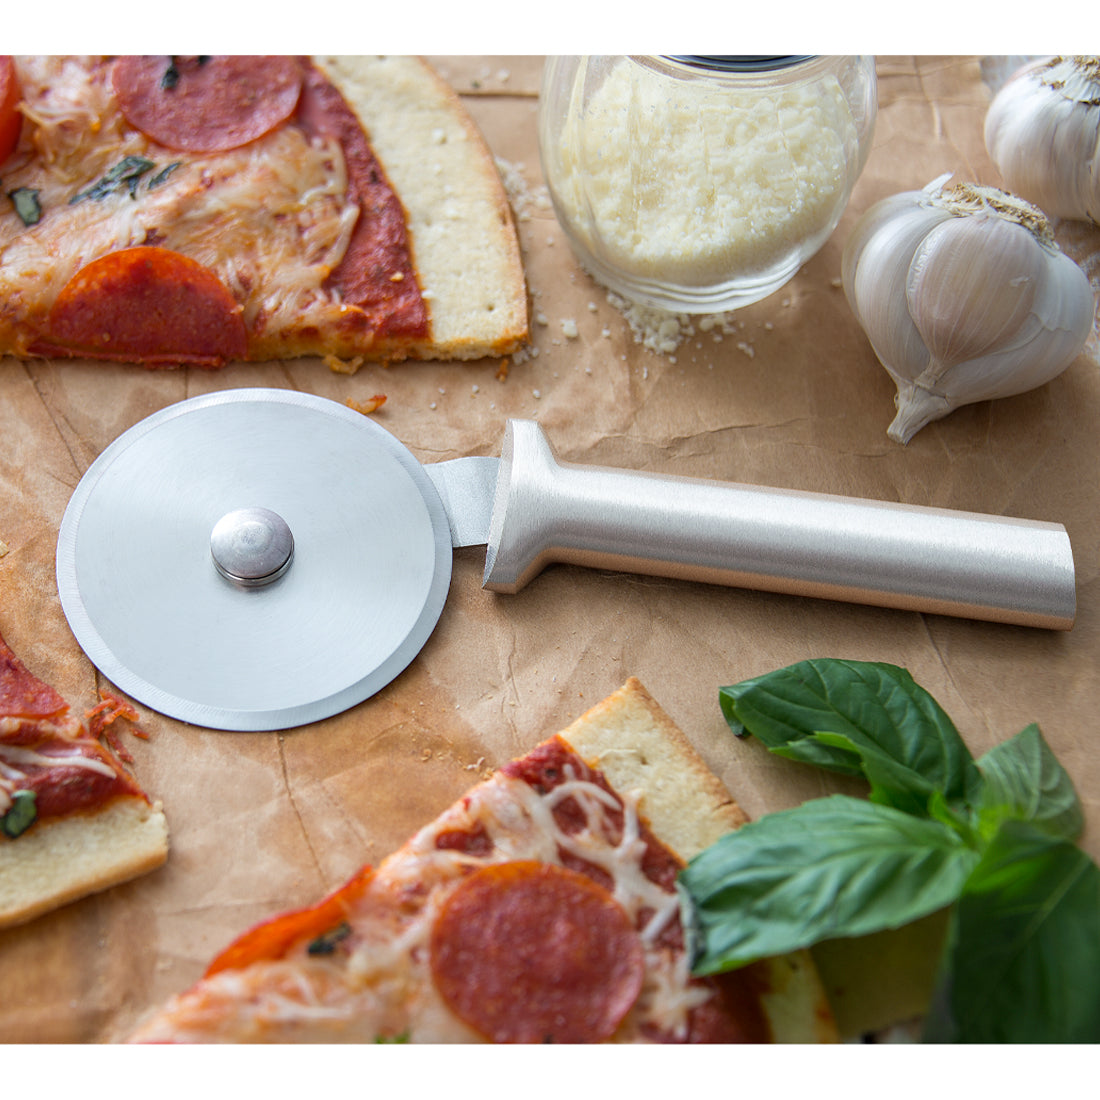 Knife Sharpener for Pizza Cutters